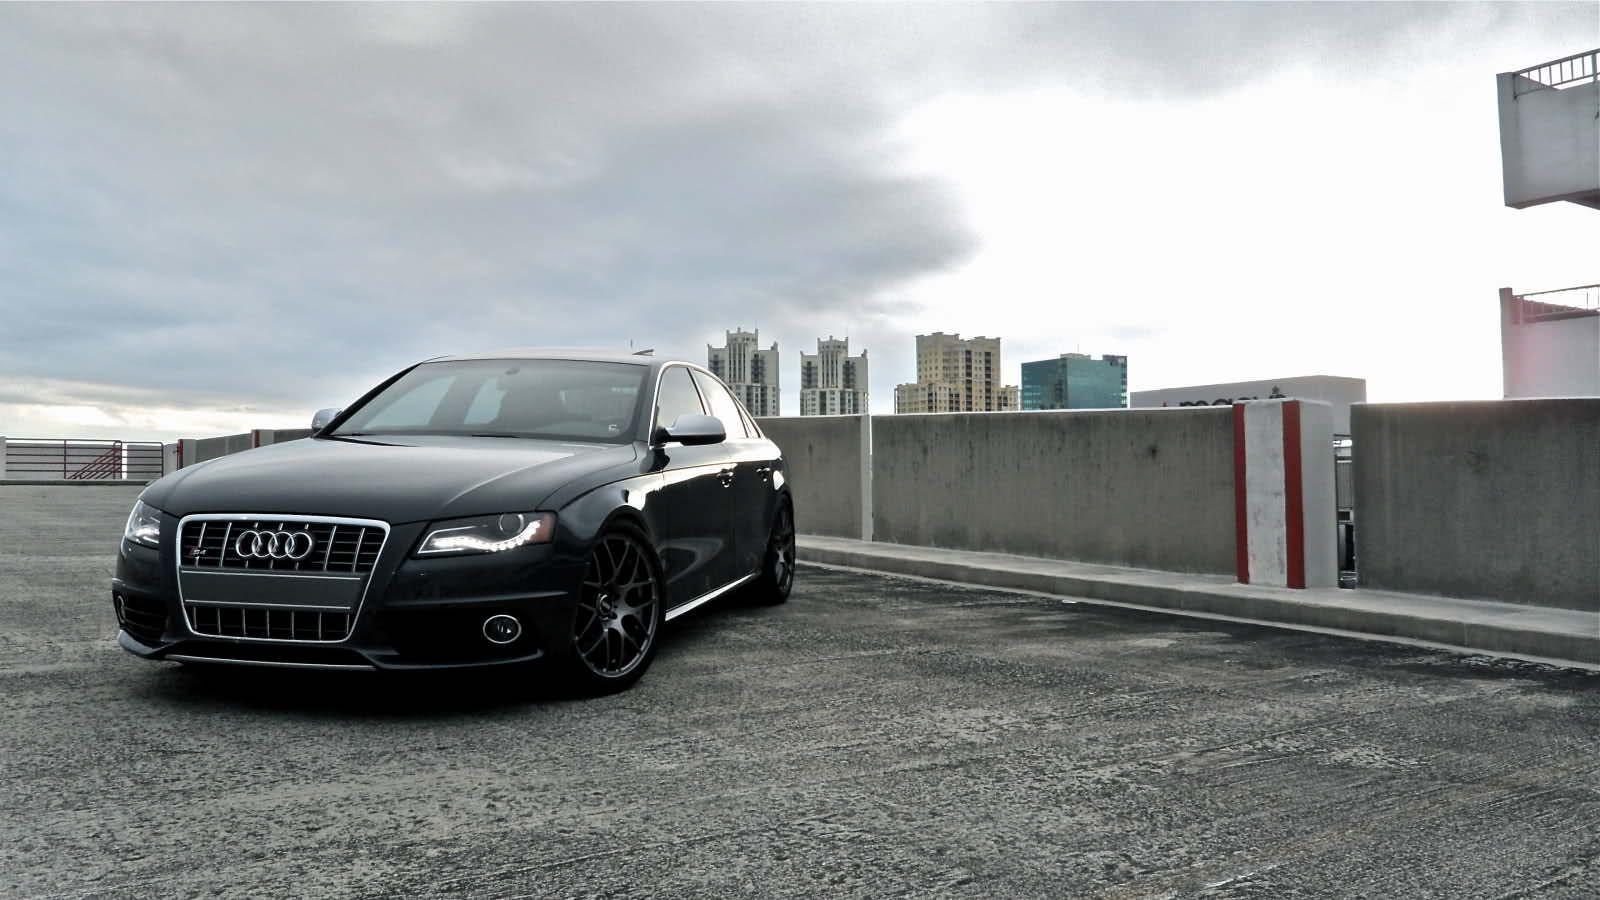 Audi A4 Wallpapers Top Free Audi A4 Backgrounds Wallpaperaccess